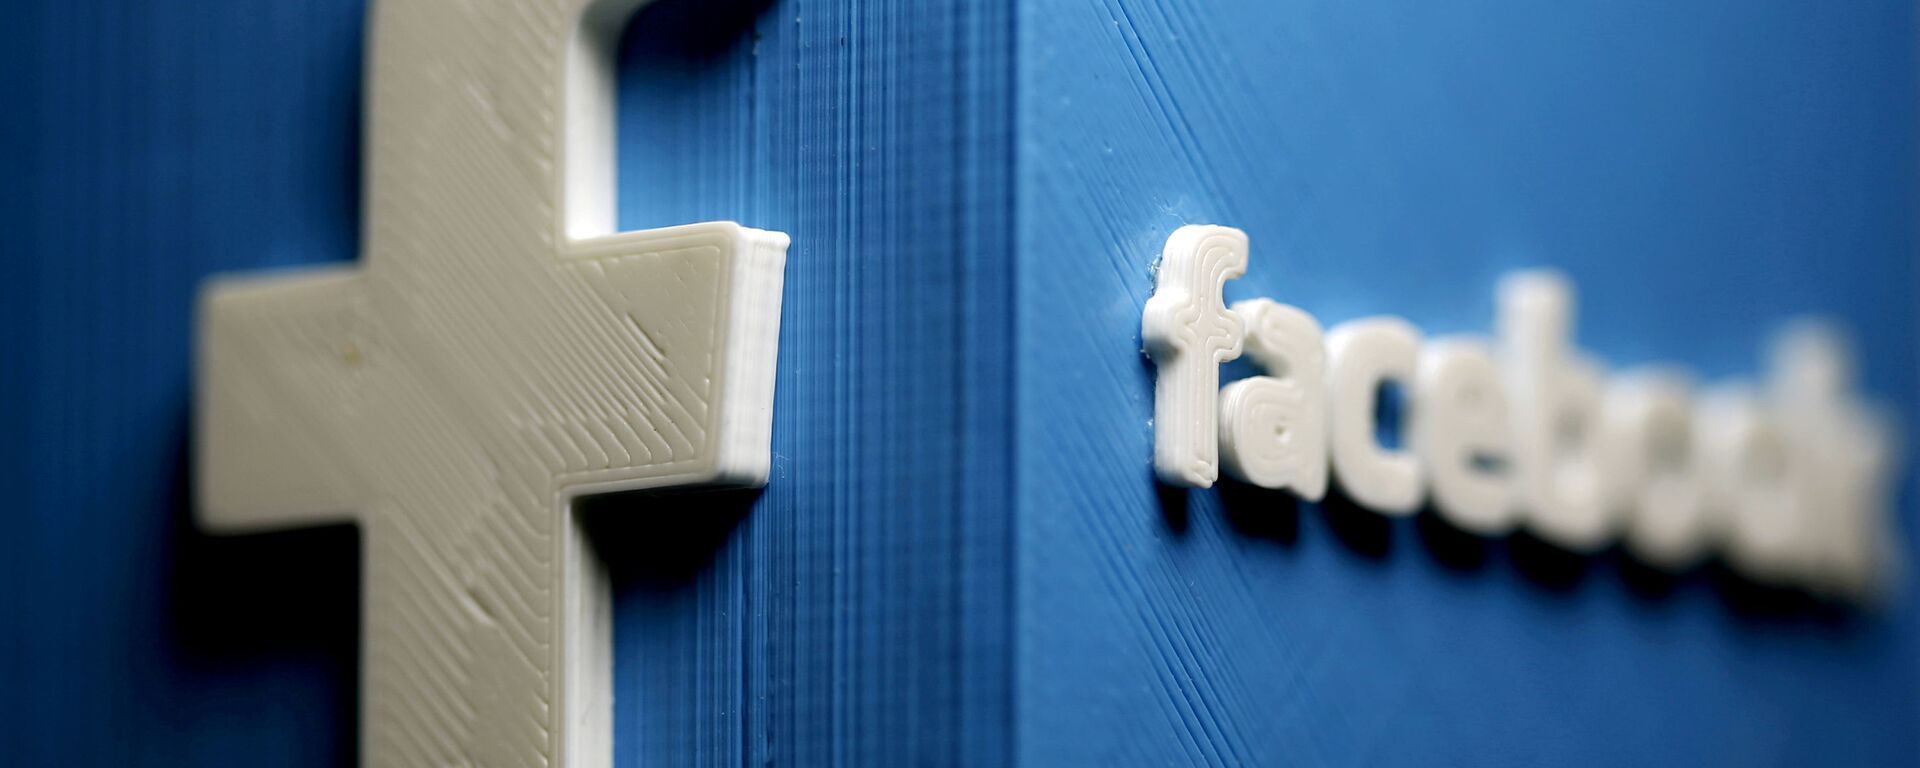 A 3D plastic representation of the Facebook logo is seen in this illustration in Zenica, Bosnia and Herzegovina, May 13, 2015. REUTERS/Dado Ruvic//File Photo/File Photo - Sputnik International, 1920, 29.03.2021